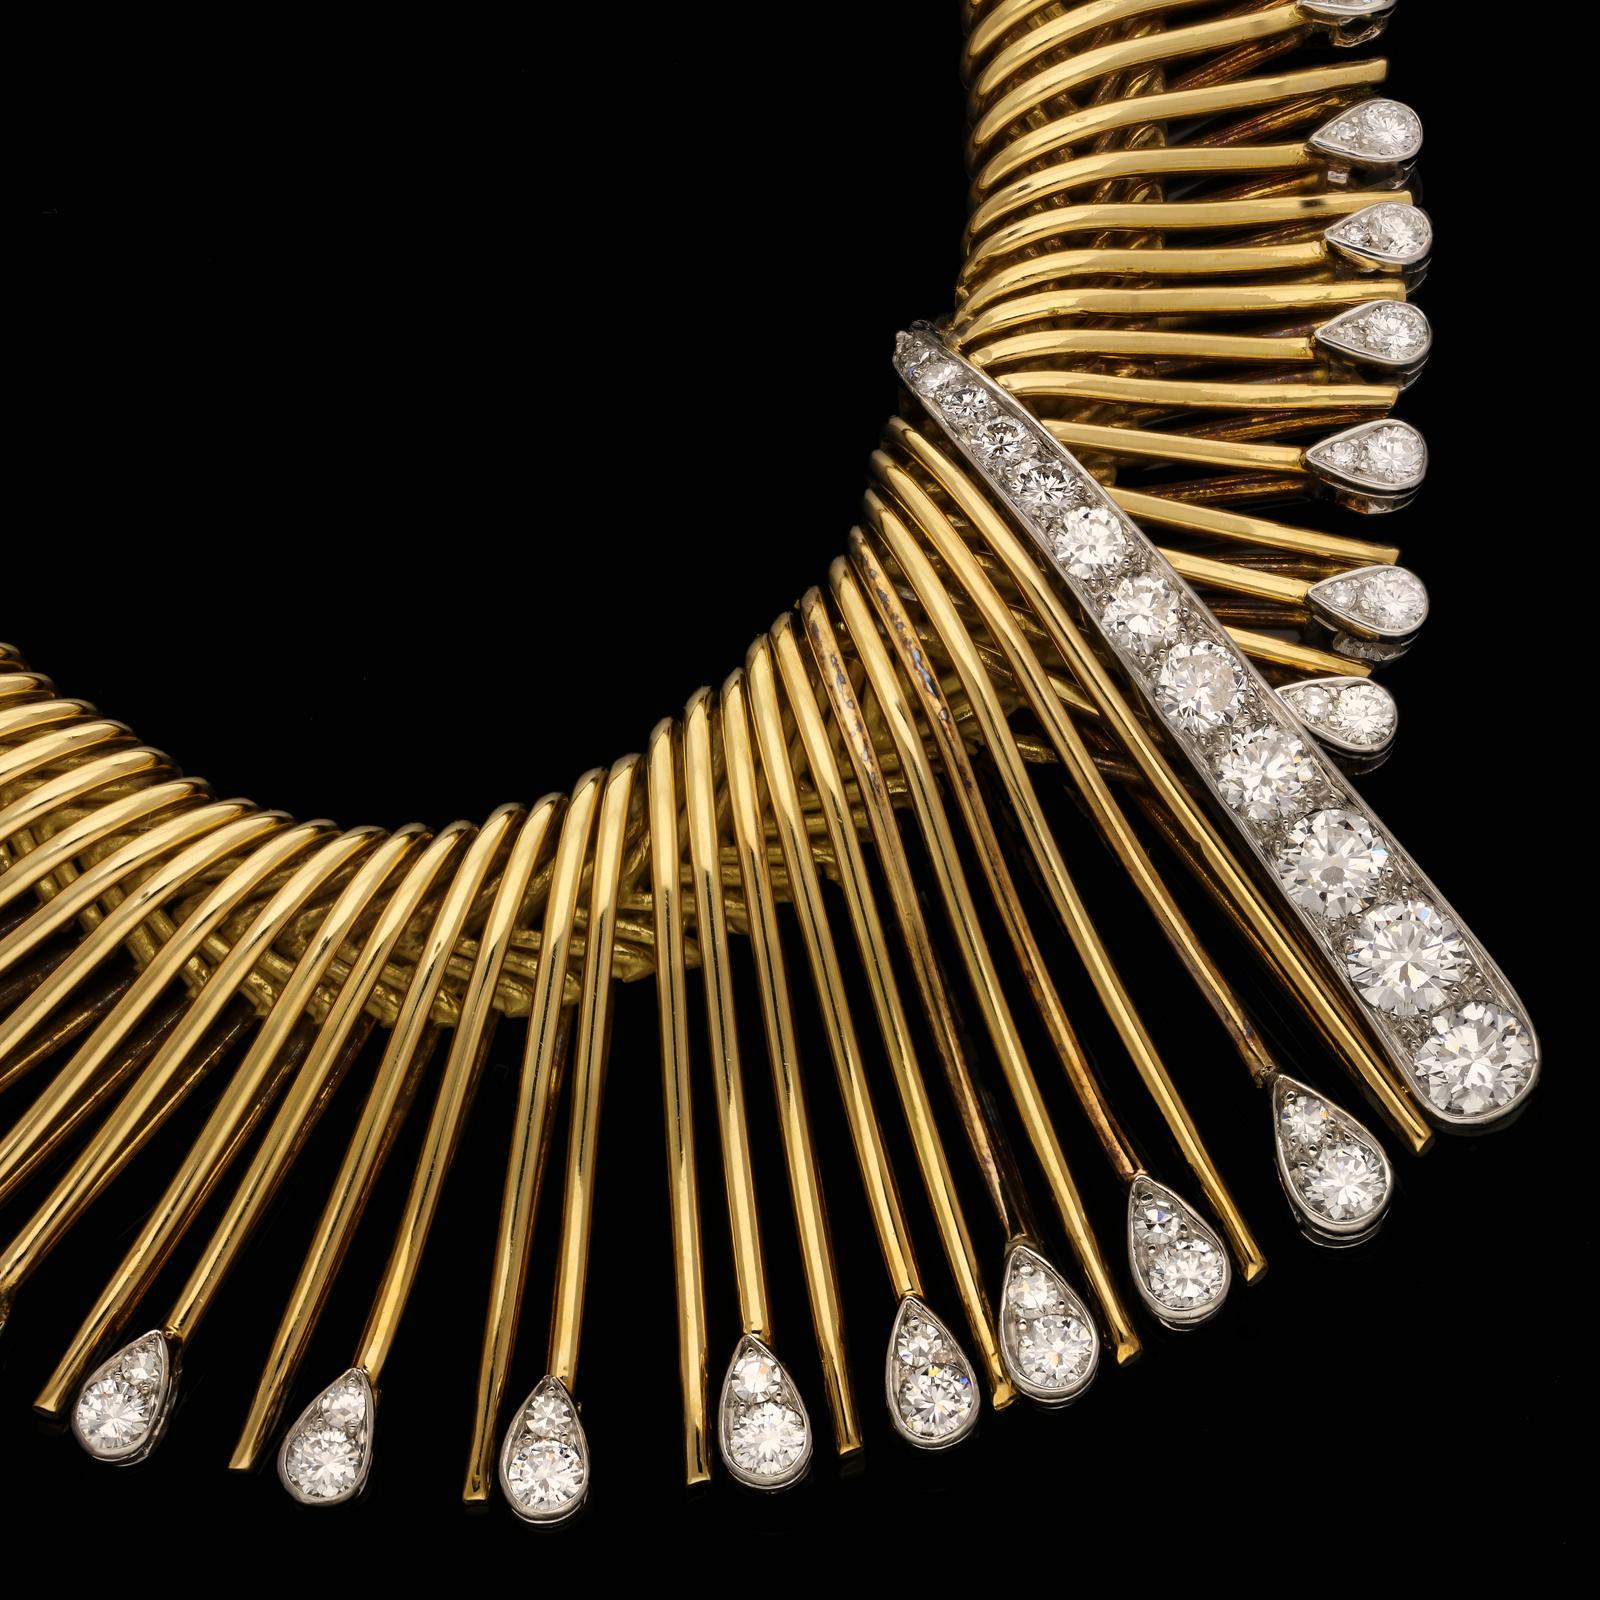 A beautiful Cheveaux D’Ange gold and diamond necklace by Van Cleef & Arpels 1954, designed as a highly flexible sinuous row of 18ct yellow gold ‘angel hair’ threads tapering down in length from front to back, on the front half of the necklace each